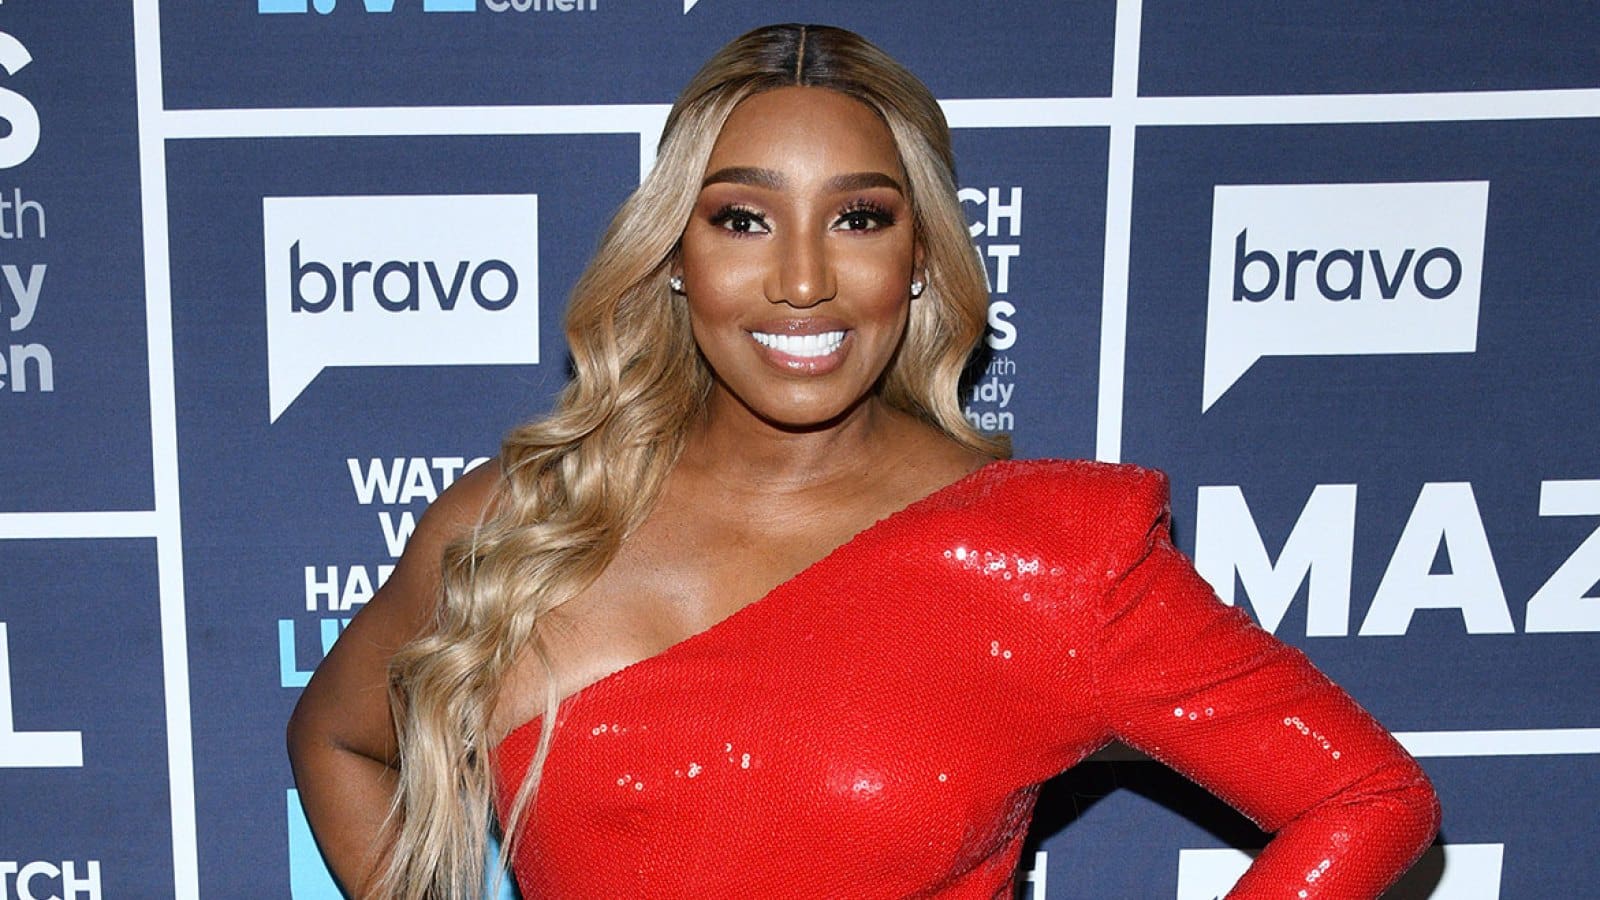 NeNe Leakes Makes Fans Emotional With This Video